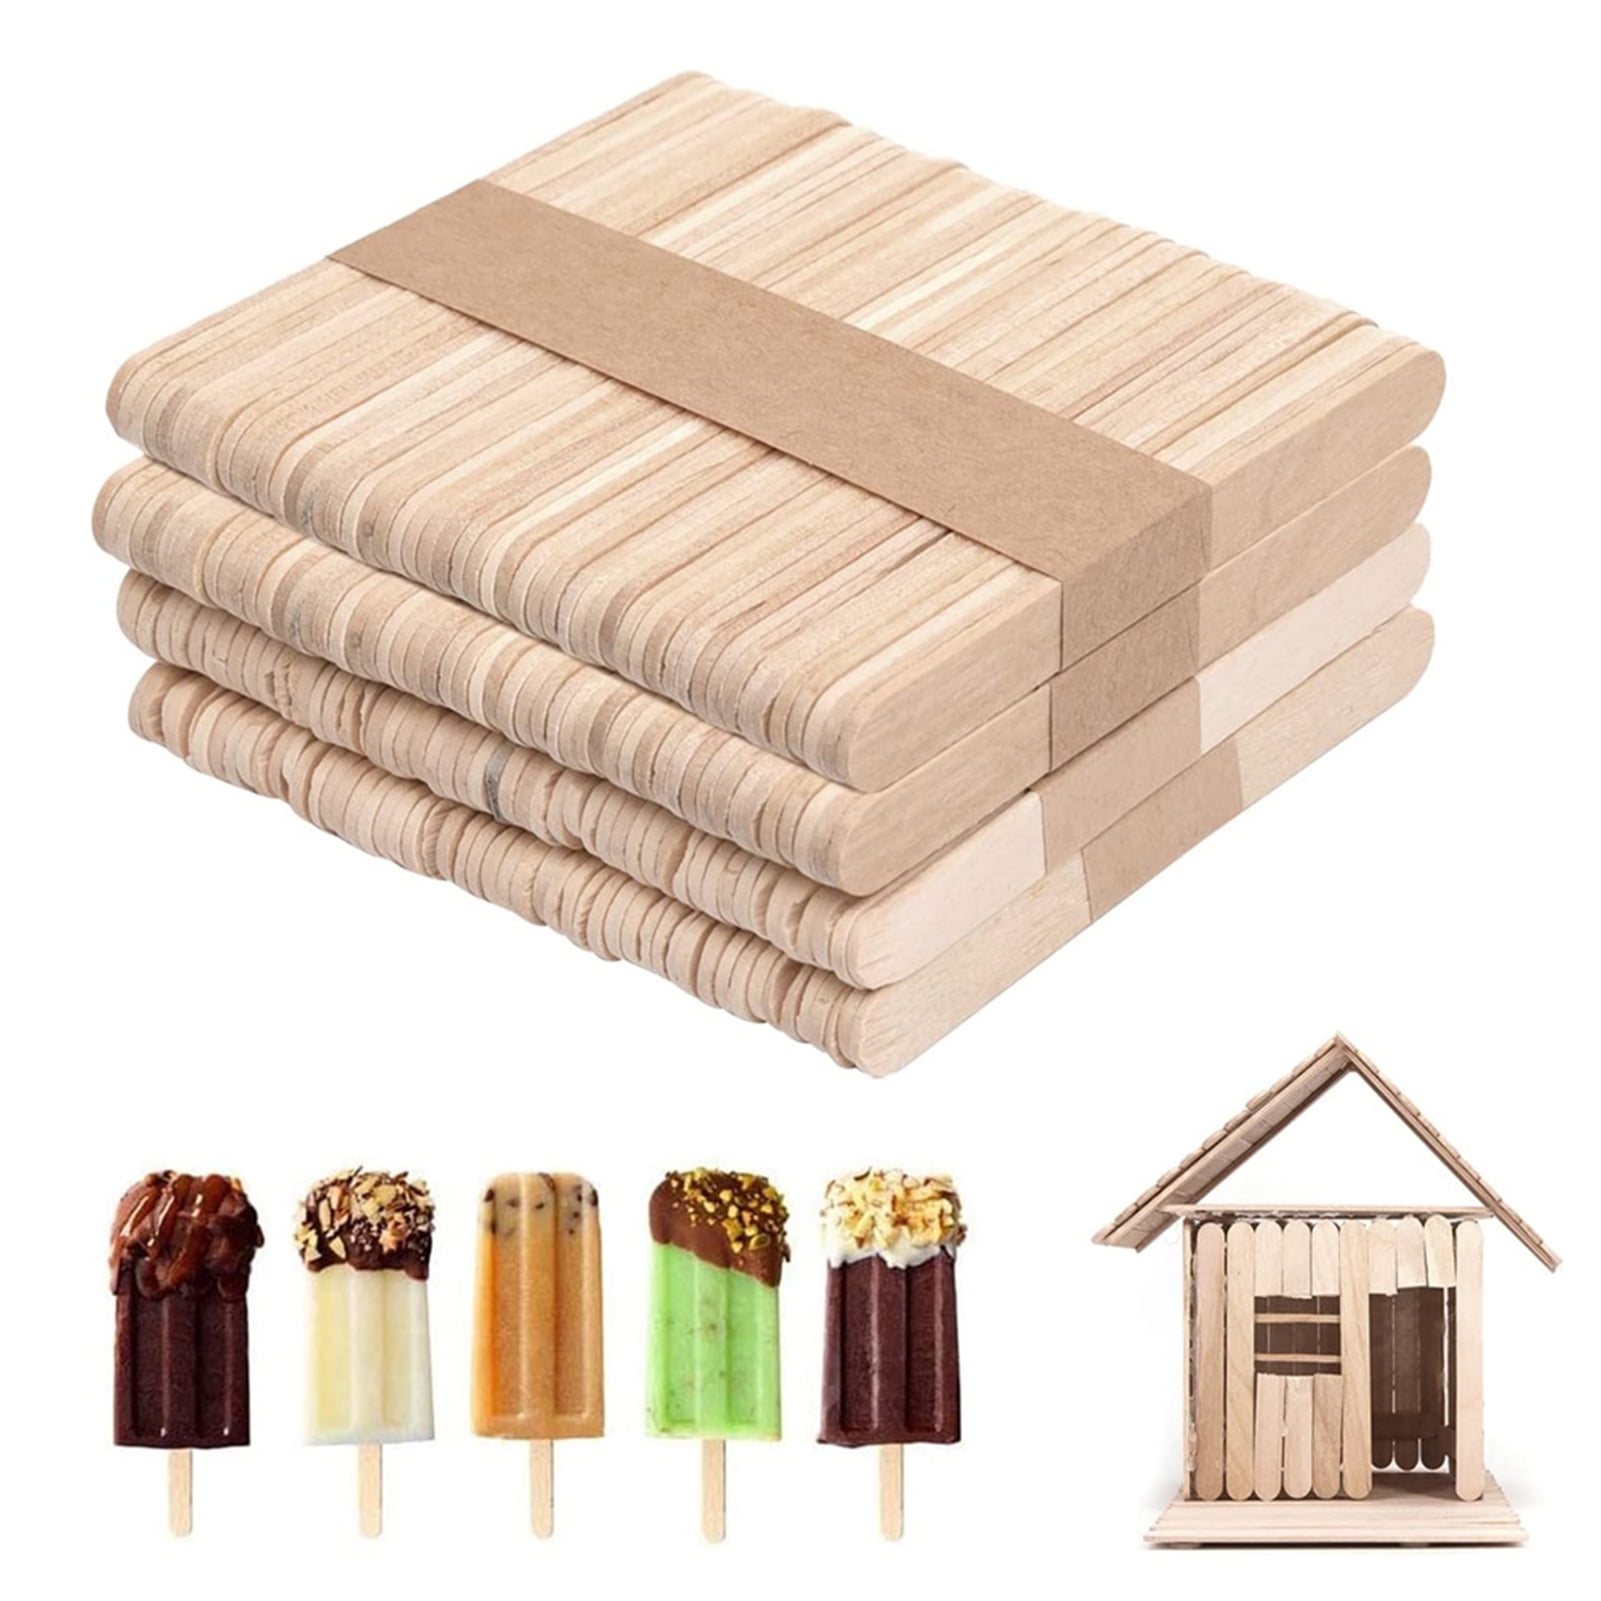 300 Count Mini Wooden Craft Sticks Bulk, Wood Ice Cream Popsicle Stick for Crafts, 2.5 x 0.4 in, Brown